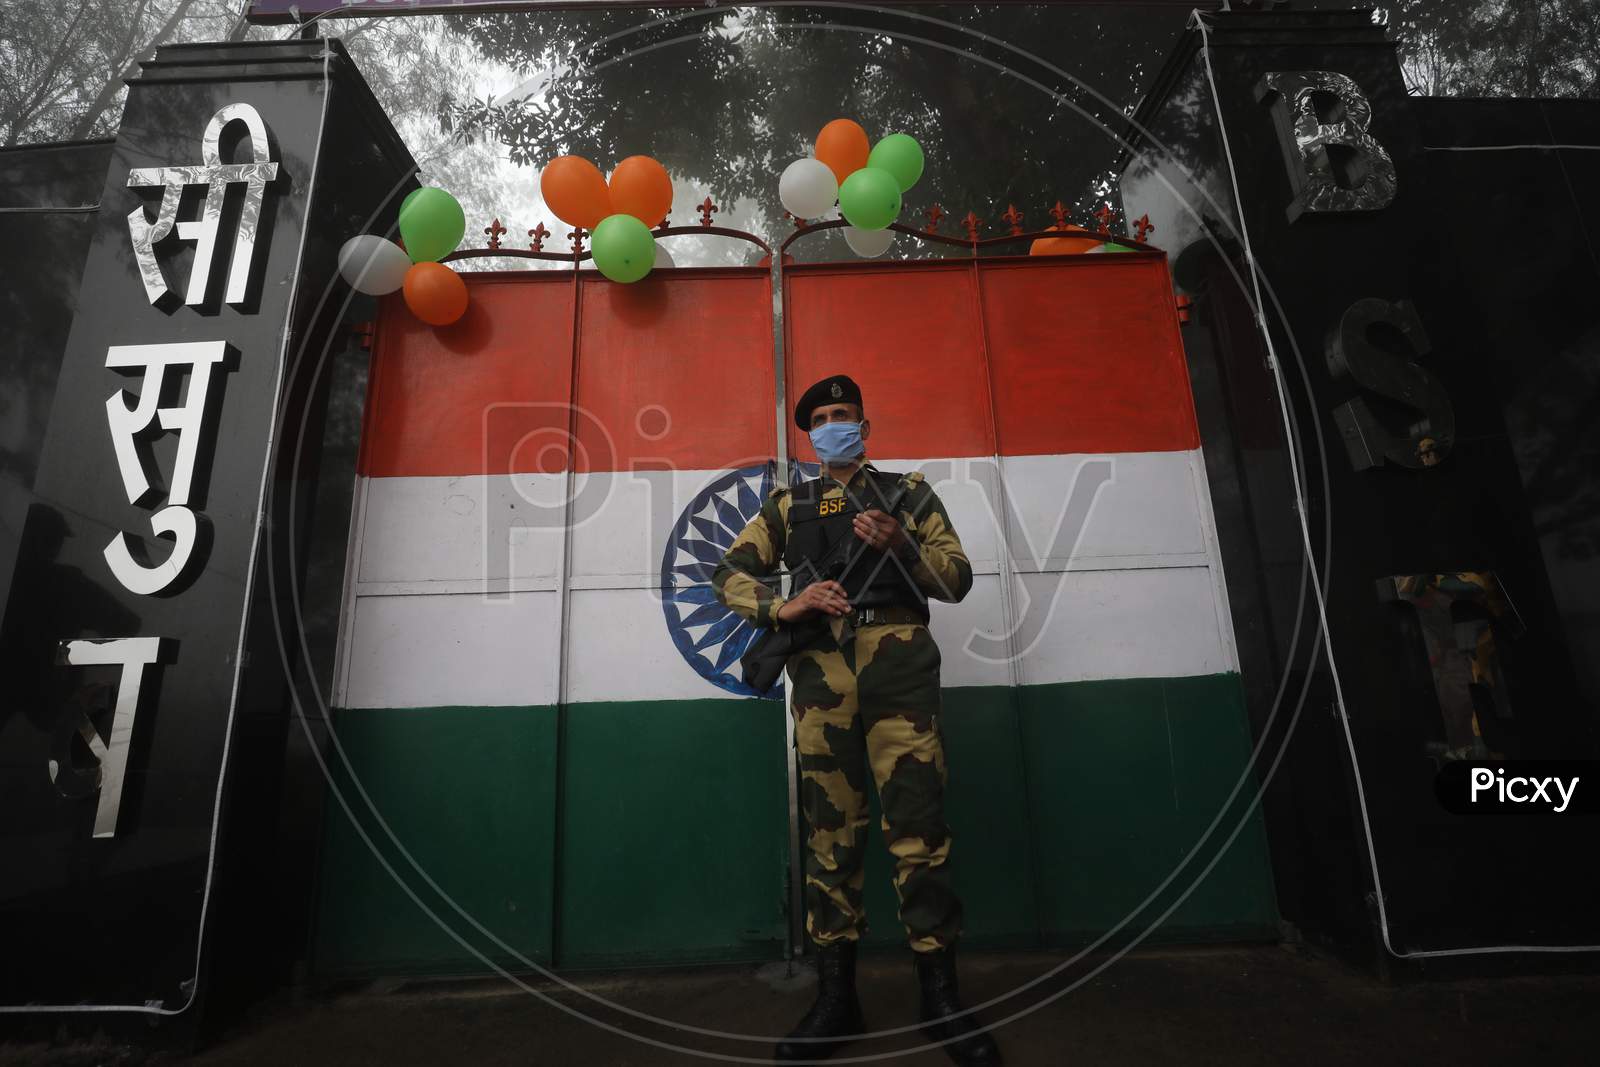 BSF Soldier stand guard at octroi post in Suchatgarh on the occession of Republic day celebration in Jammu ,26,JAN,2021.